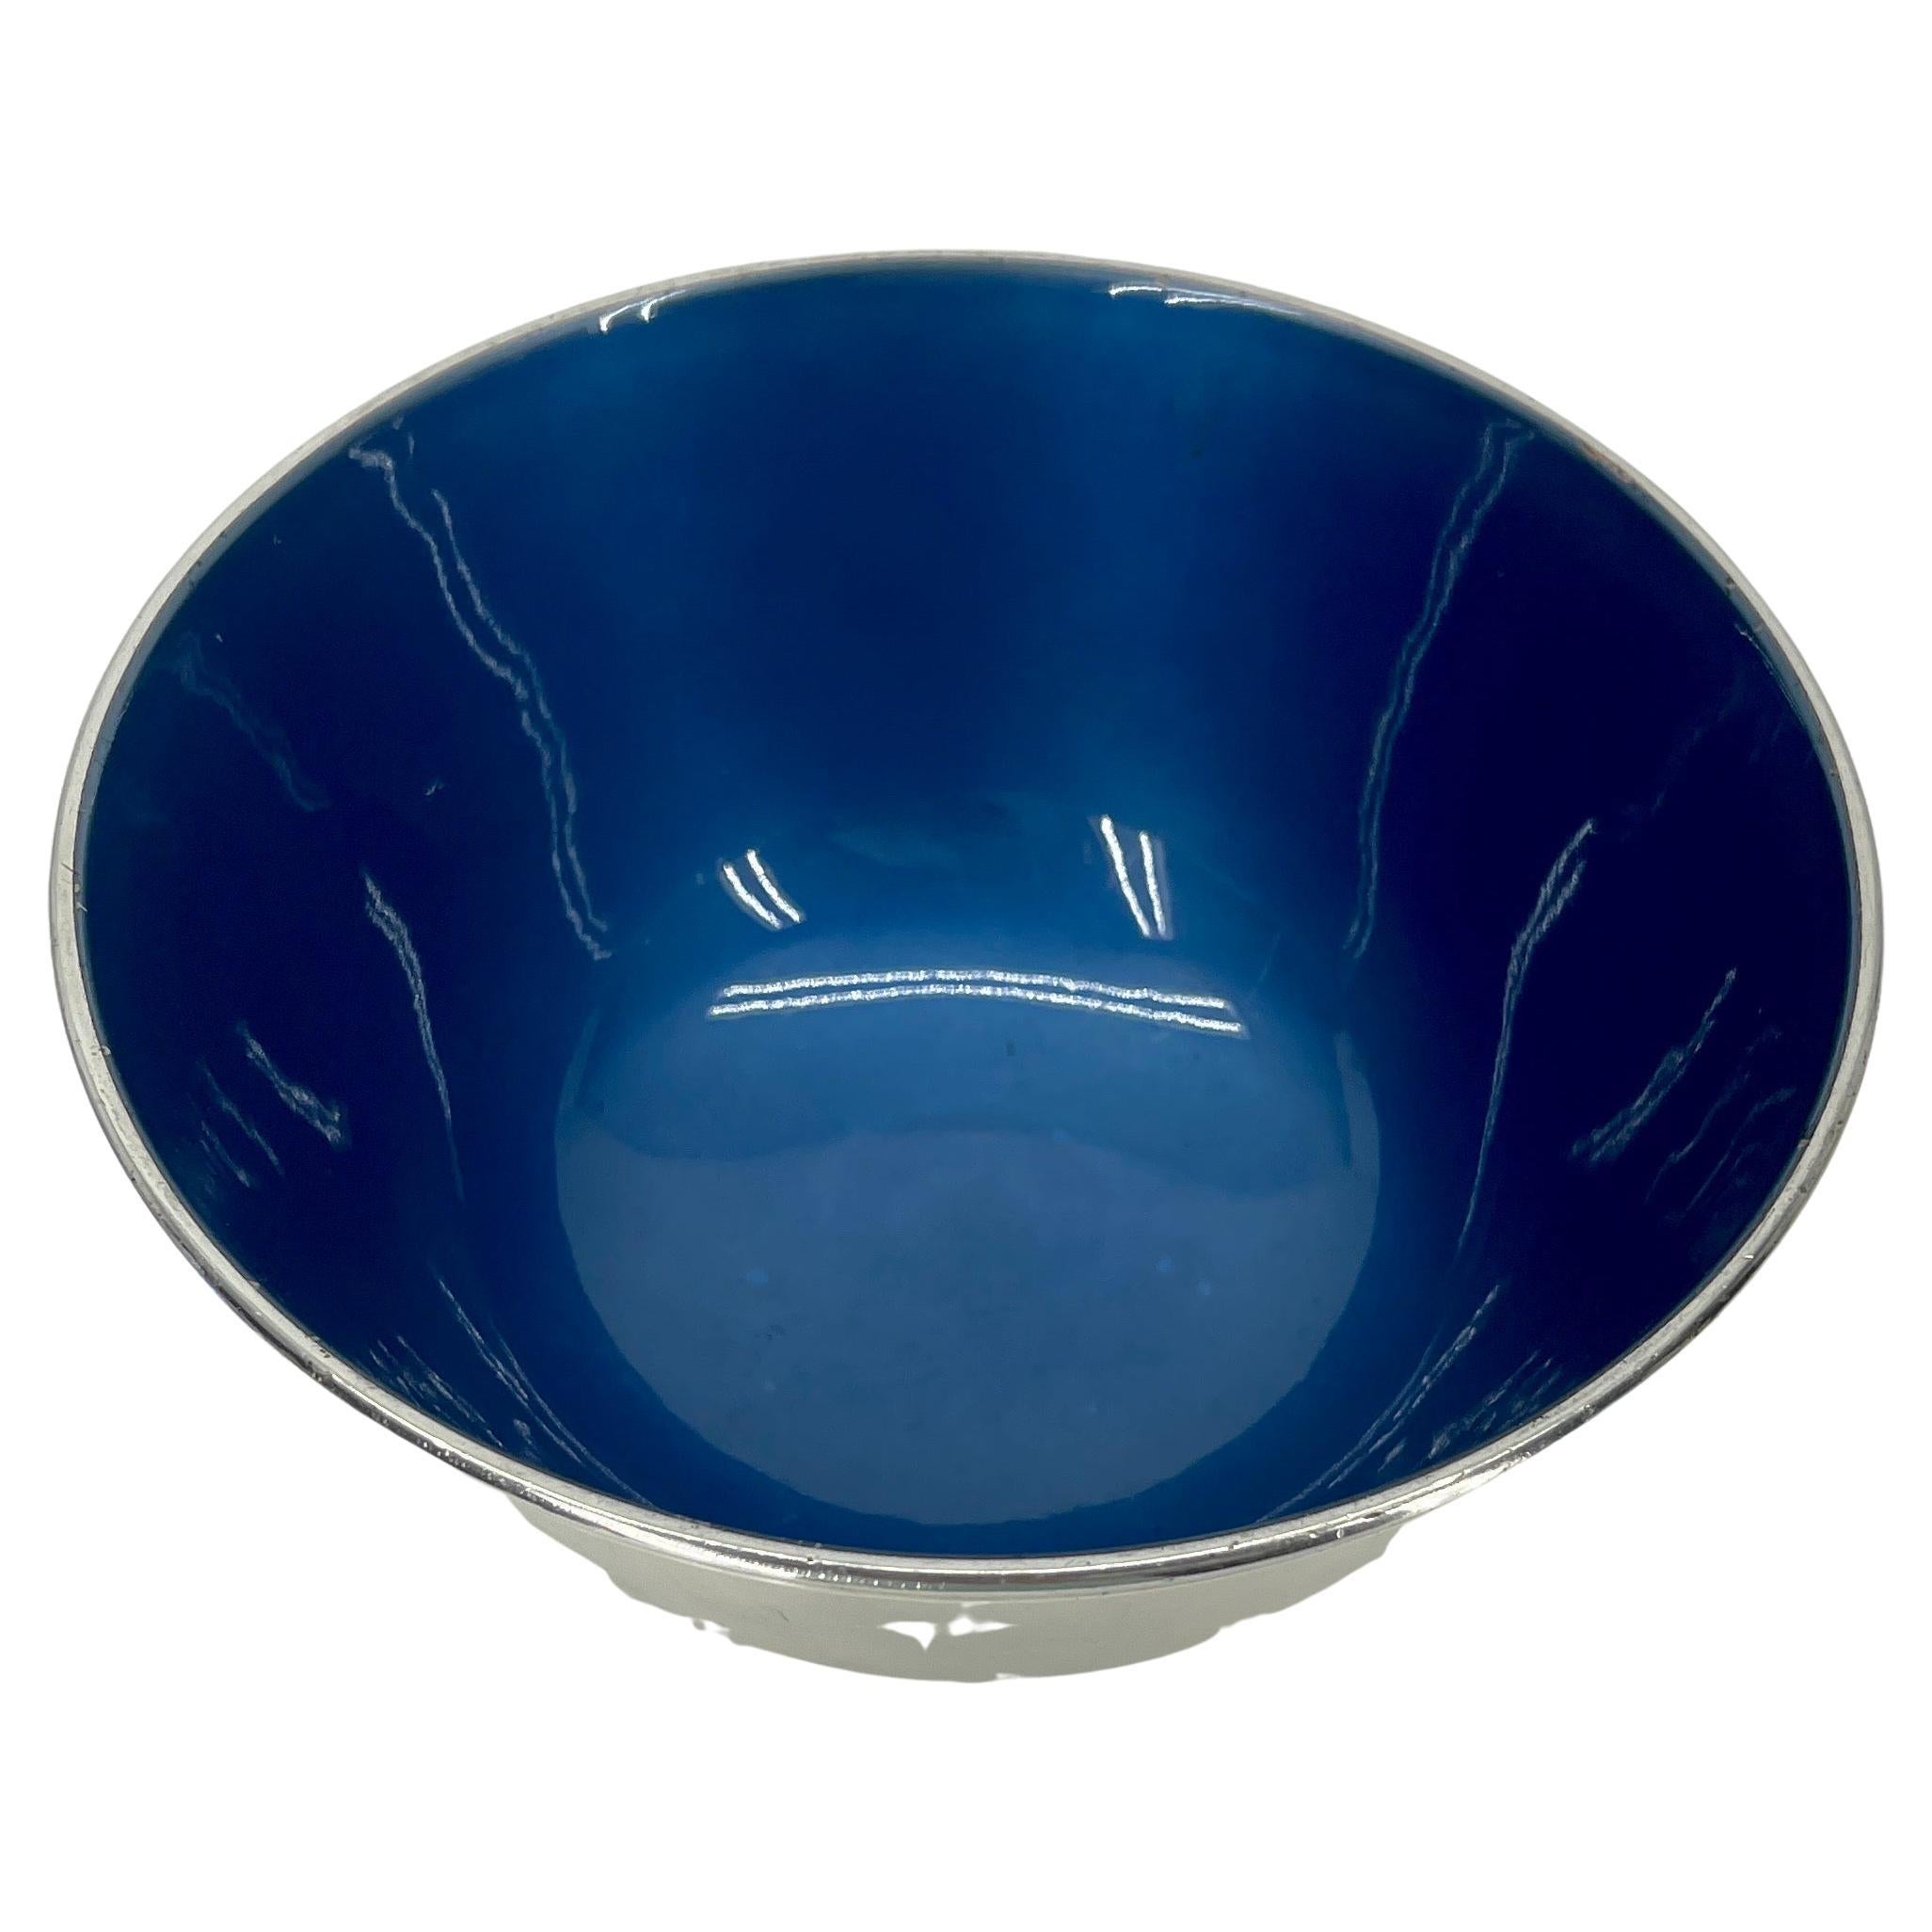 1960's silver plate bowl with ocean blue enamel by Towle.
The bowl is marked TOWLE E.P. 5003.